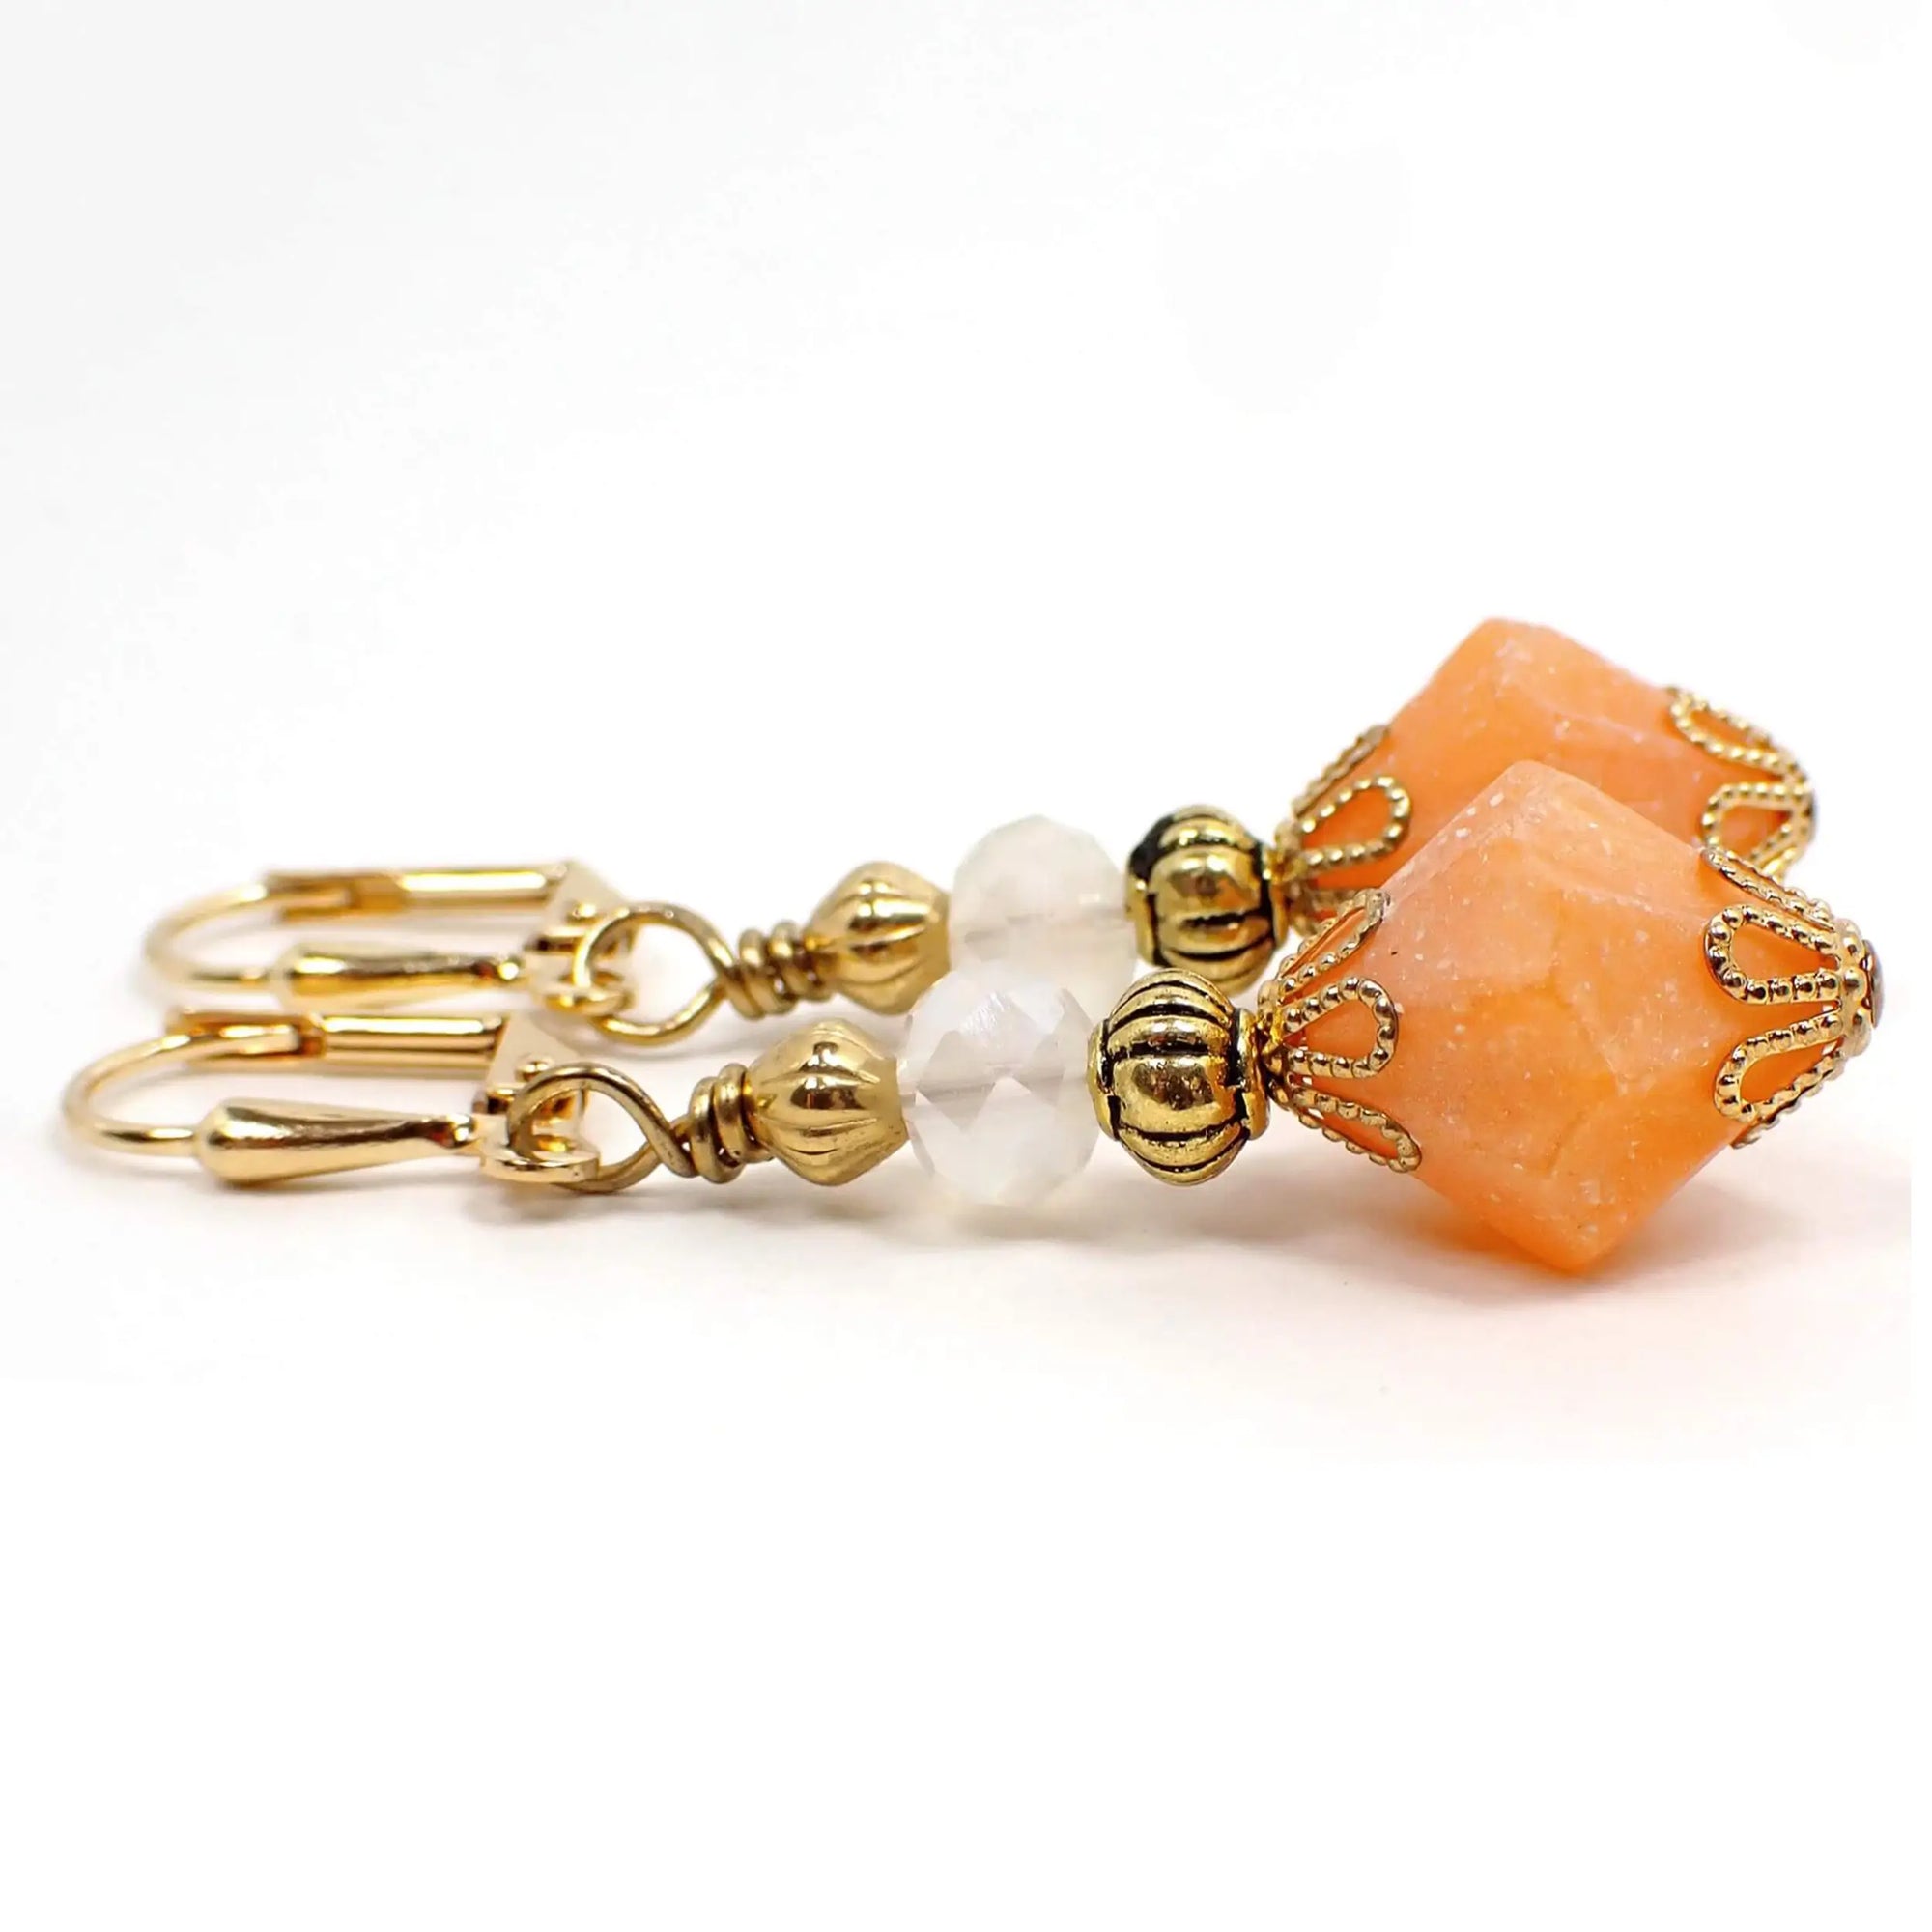 Side view of the handmade bicone acrylic drop earrings. The metal is gold plated in color. There are faceted glass beads at the top in a semi translucent white color. The bottom acrylic beads are bicone shaped and are a frosted matte peach color.